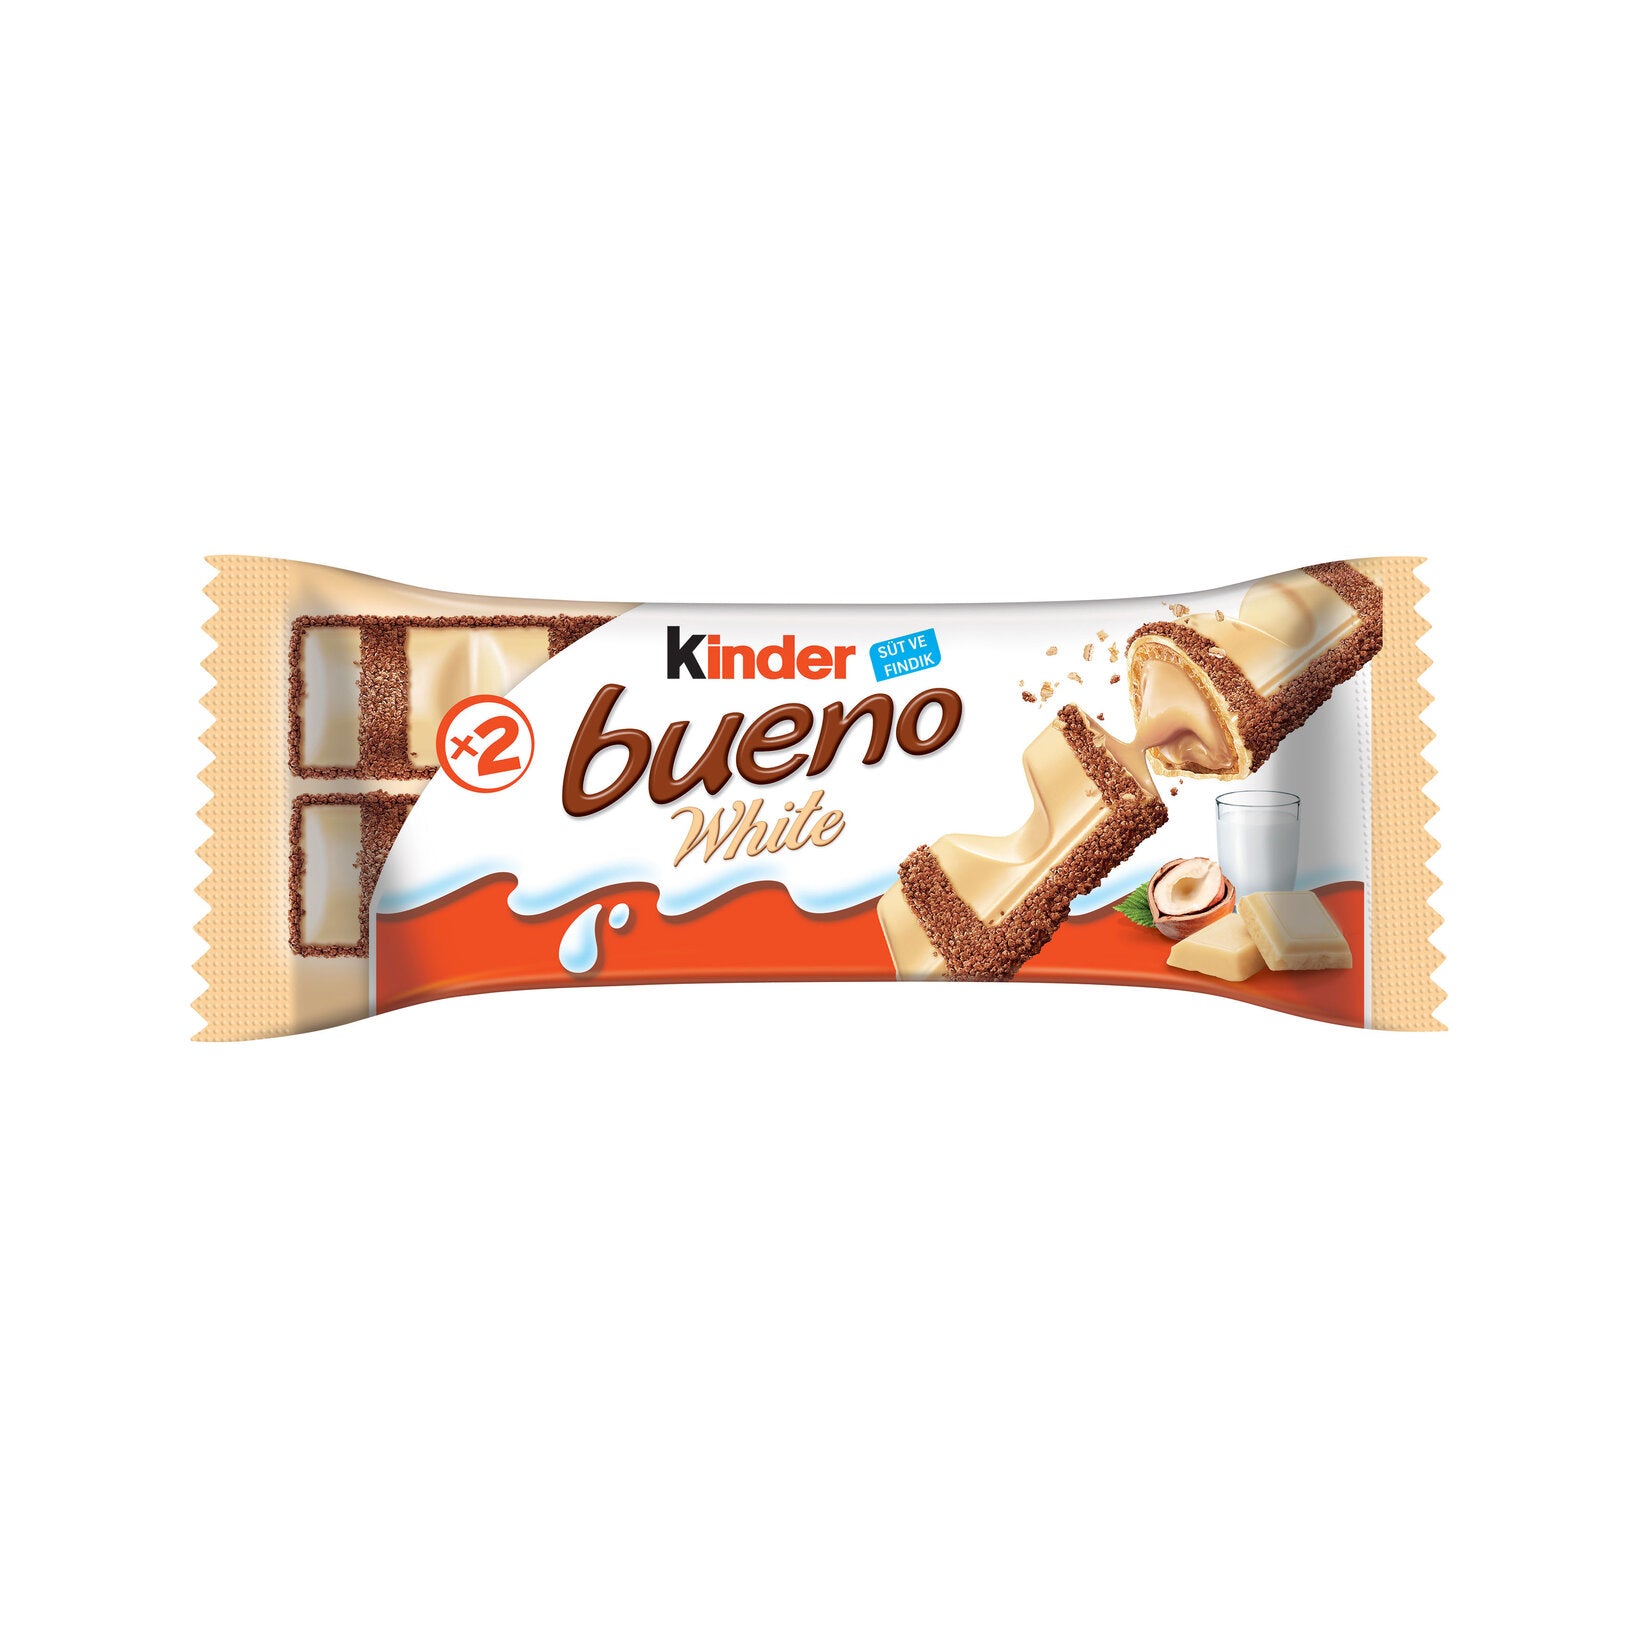 Kinder Country Mini Chocolate Bars Price in India - Buy Kinder Country Mini  Chocolate Bars online at